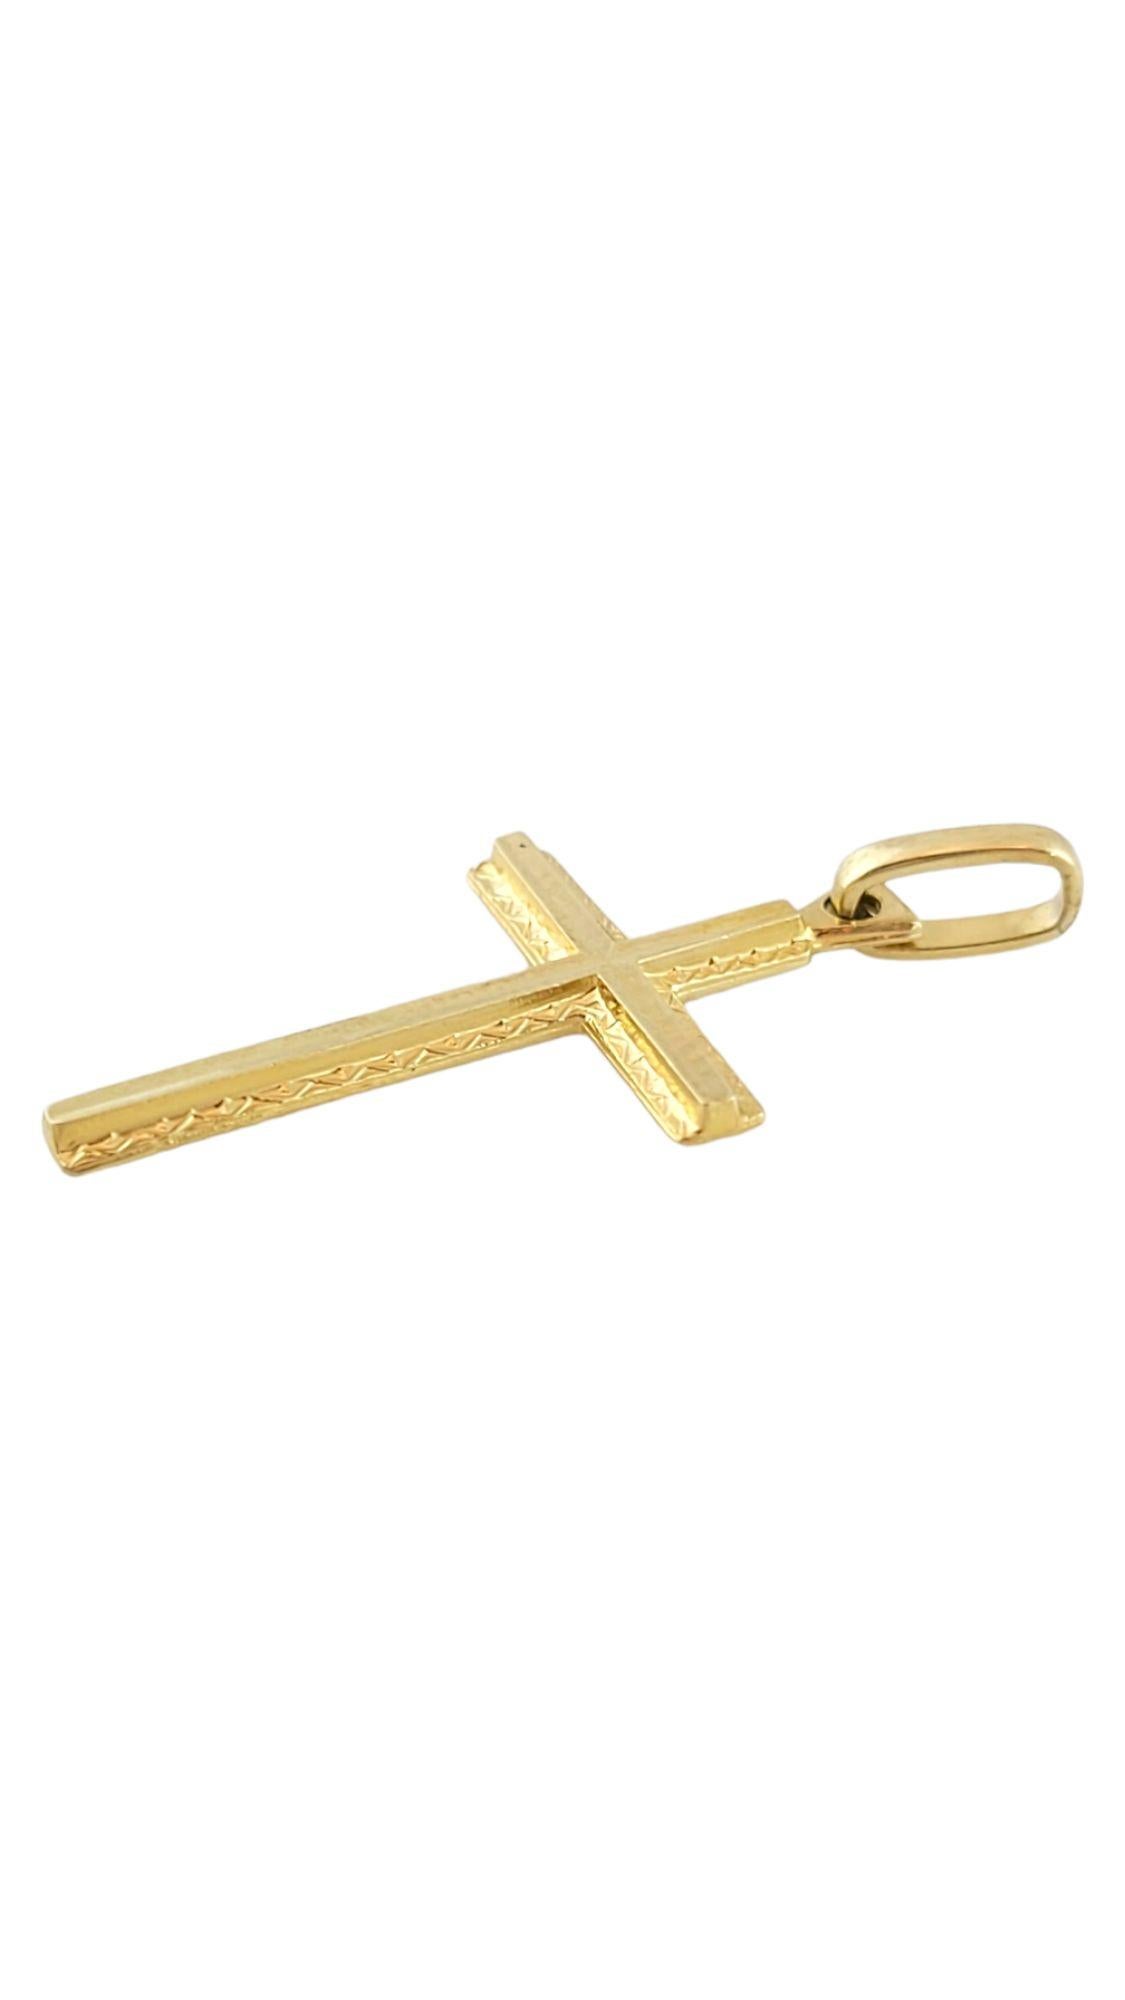 Gorgeous 14K yellow gold cross pendant!

Size: 33.5mm x 17m x 1.5mm

Weight:  2.1gr /  1.3dwt

Hallmark: Kt 14 italy 400

Very good condition, professionally polished.

*Chain not included*

Will come packaged in a gift box and will be shipped U.S.